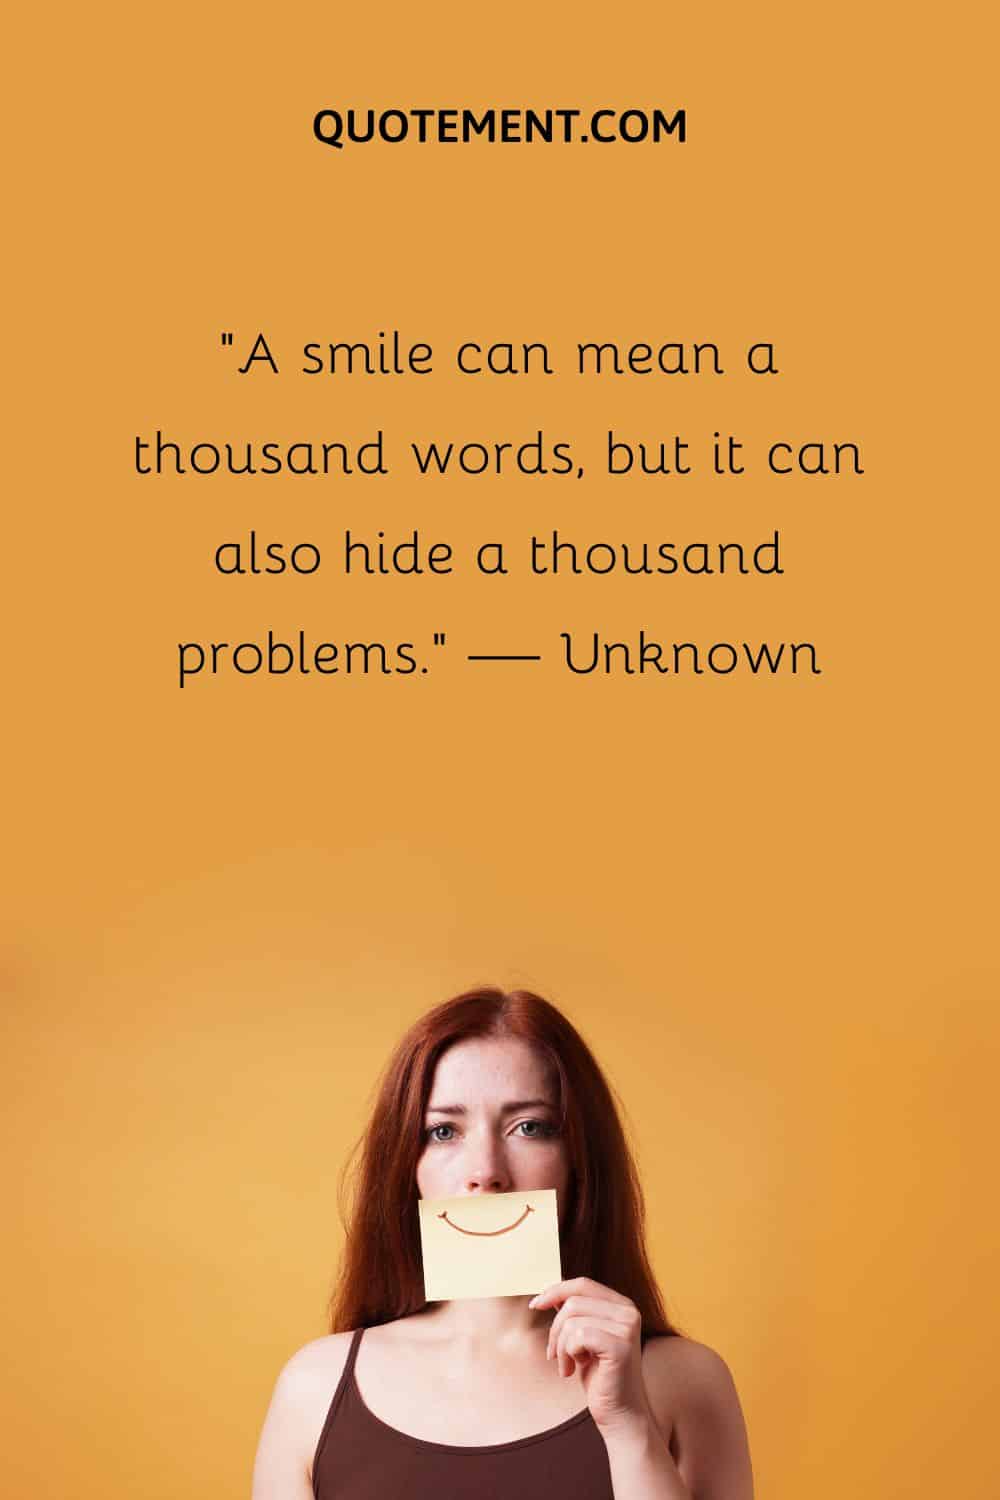 A smile can mean a thousand words, but it can also hide a thousand problems